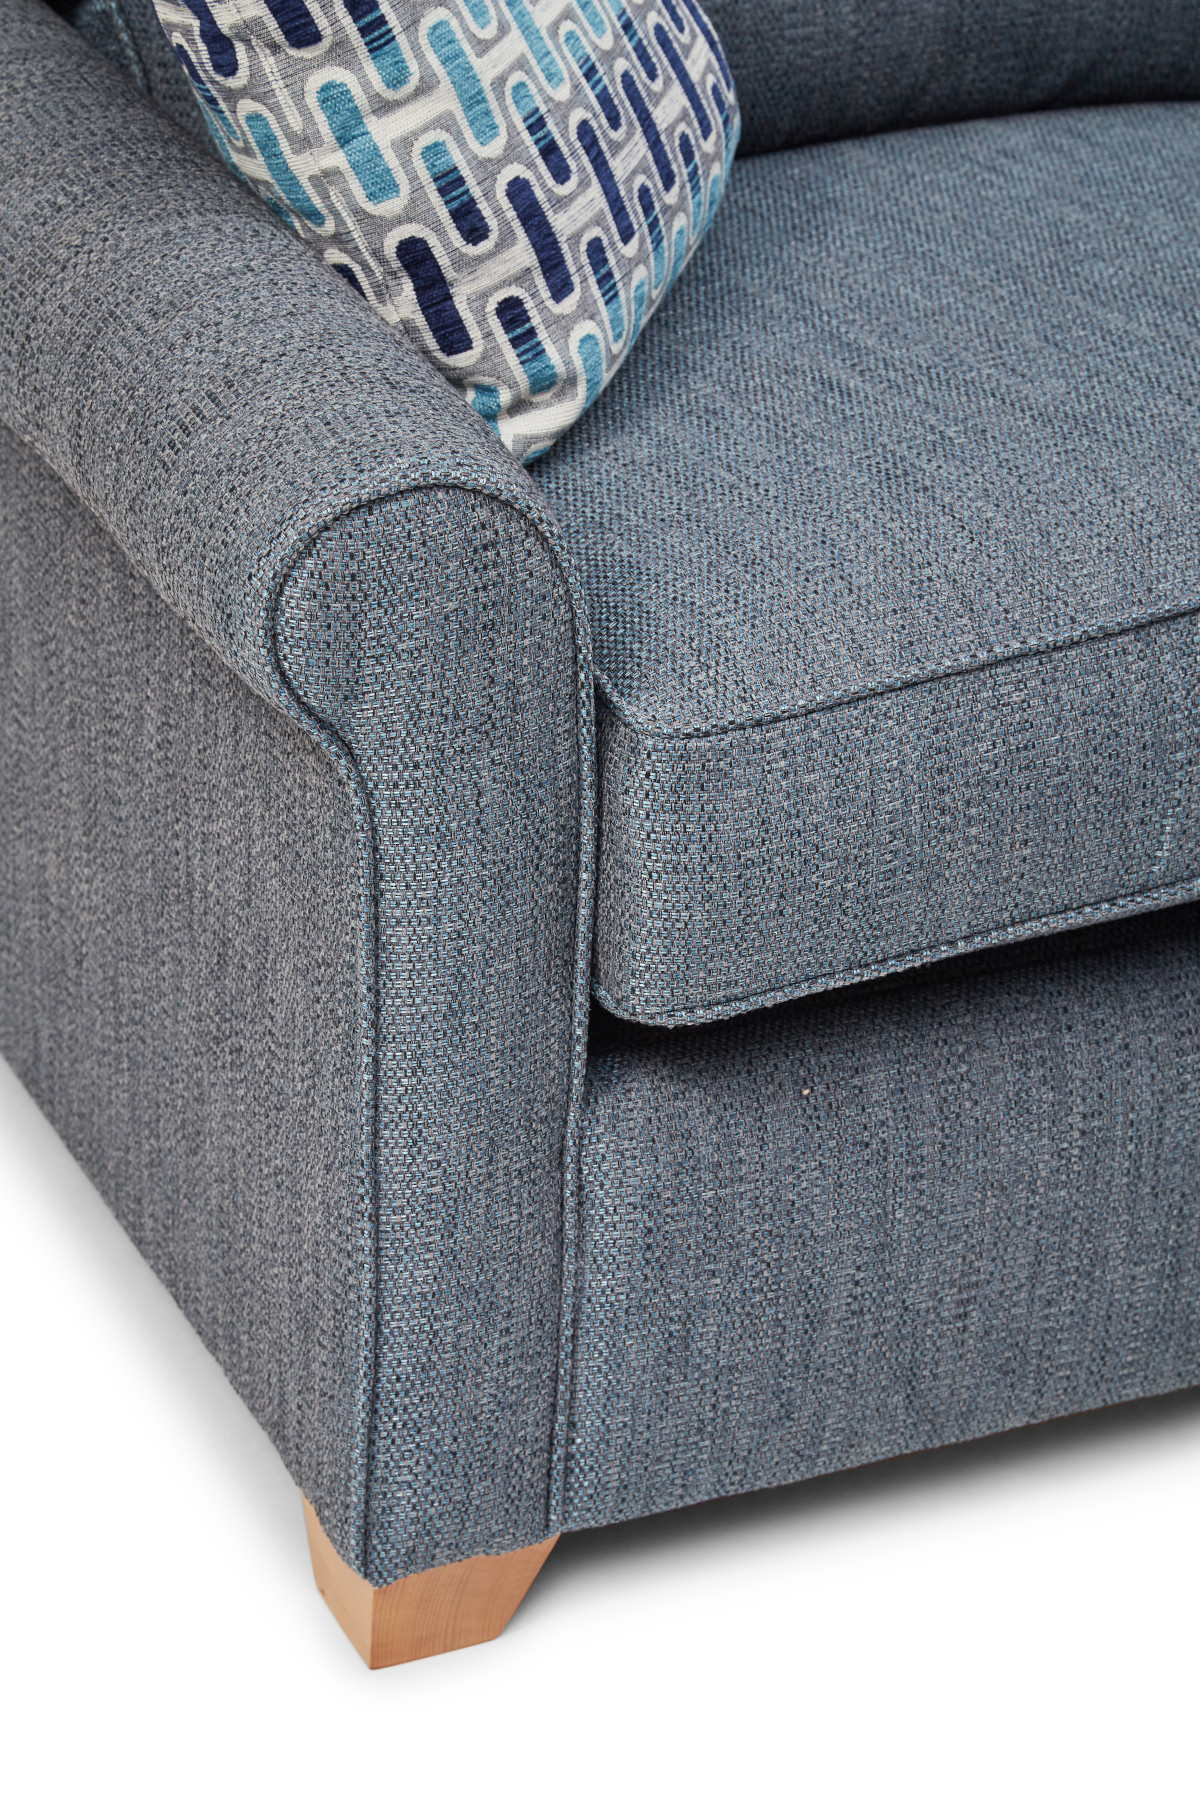 Poppy 3 Seater Sofabed